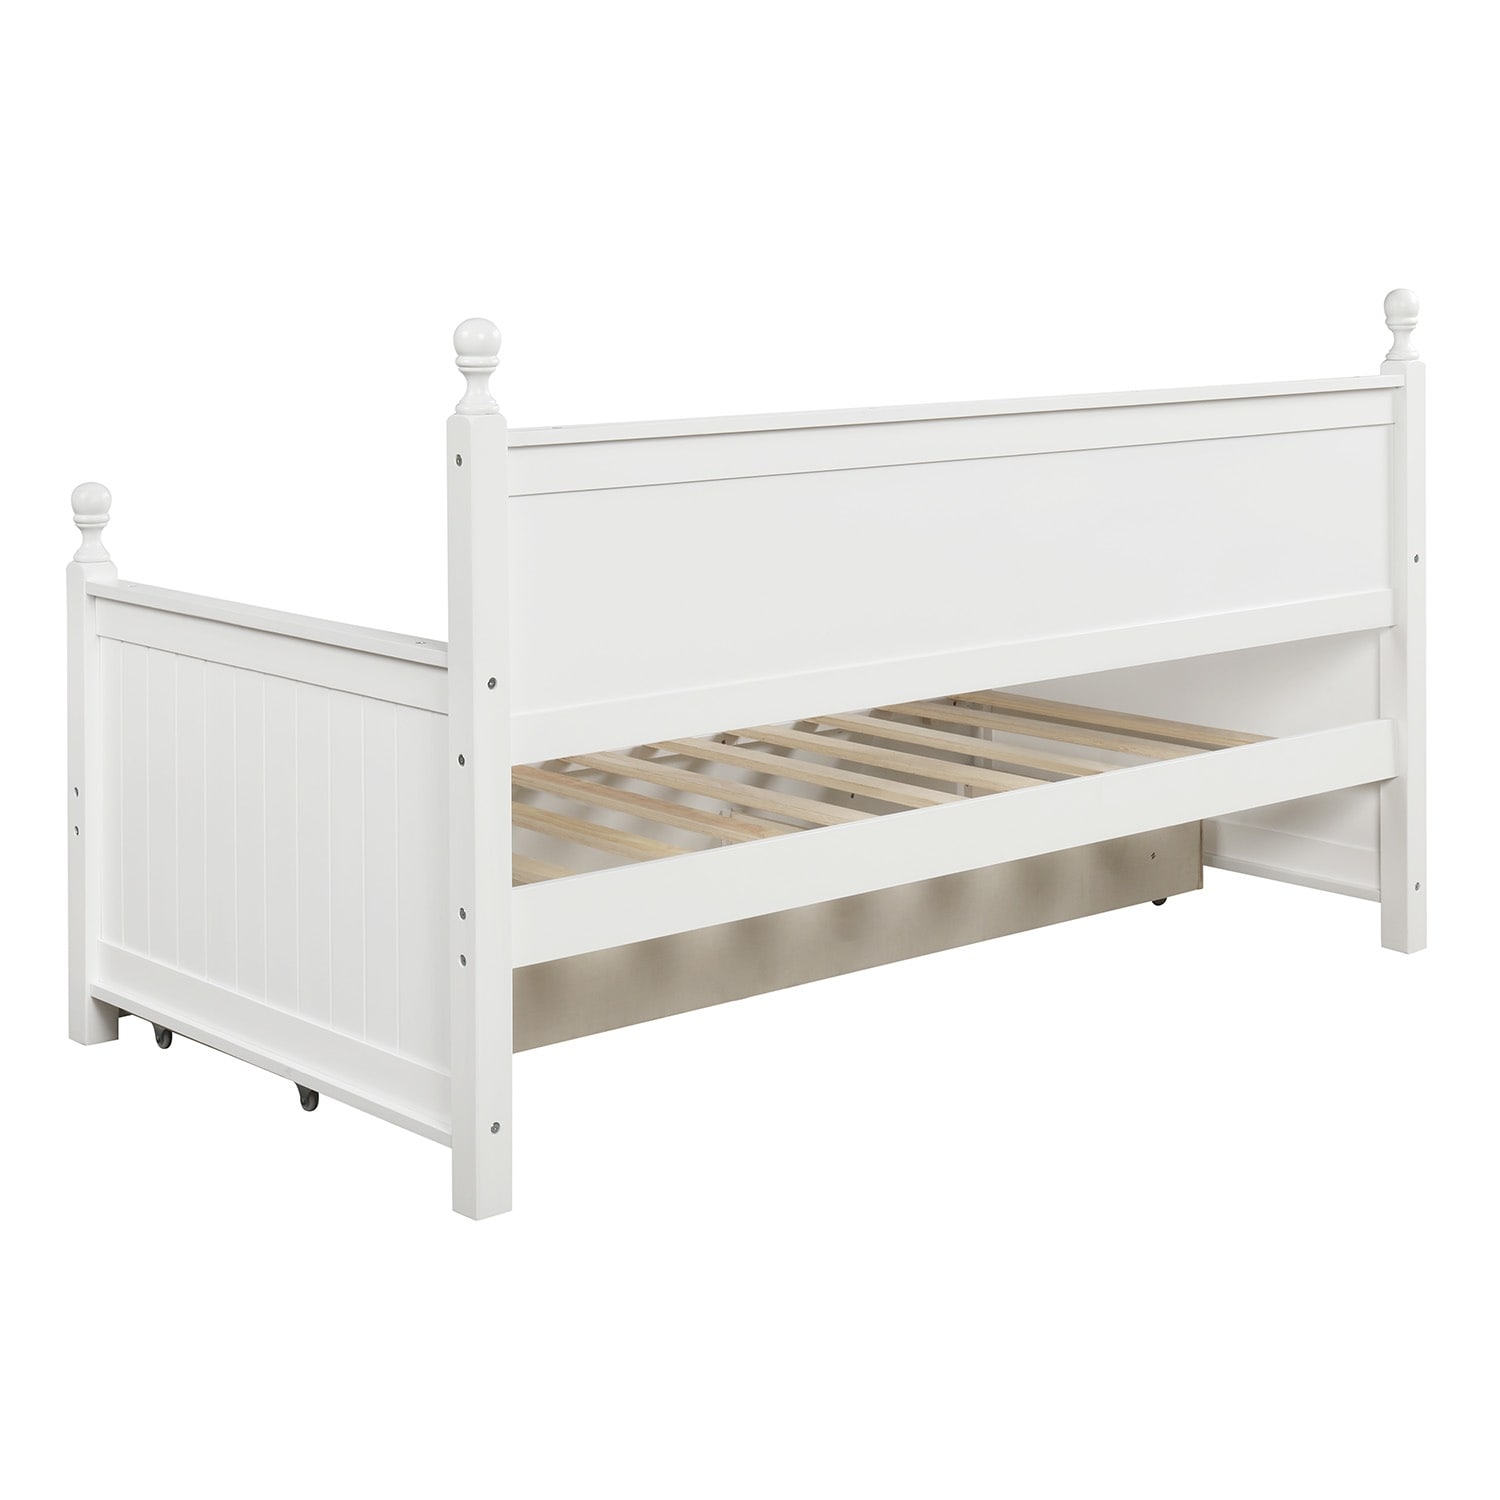 Twin Daybed with 3 Drawers, Solid Pine Storage Sofa Bed Frame for Kids